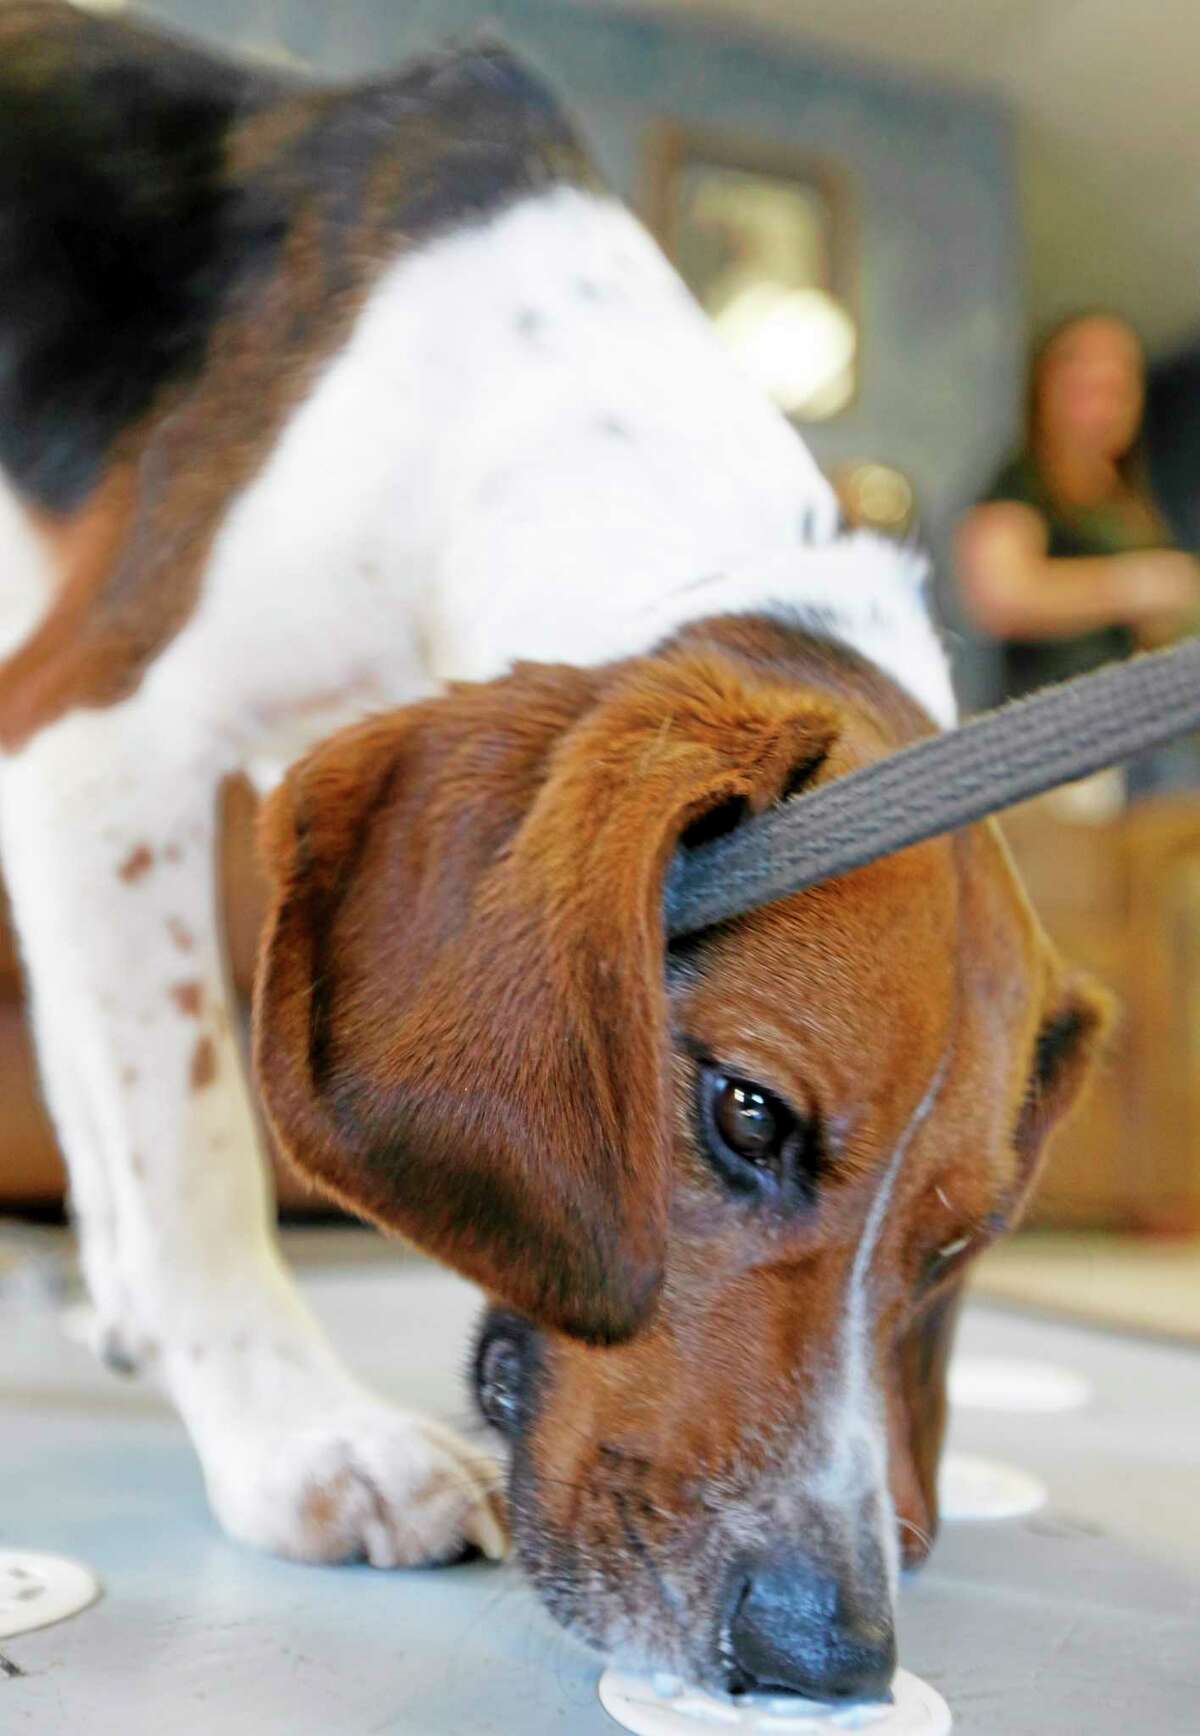 Elvis, a 2-year-old beagle, sniffs polar bear protein samples at Iron Heart Performance Dog Center in Shawnee, Kansas. Elvis is demonstrating 97% accuracy in positive identification of samples from pregnant females. AP Photo/Orlin Wagner